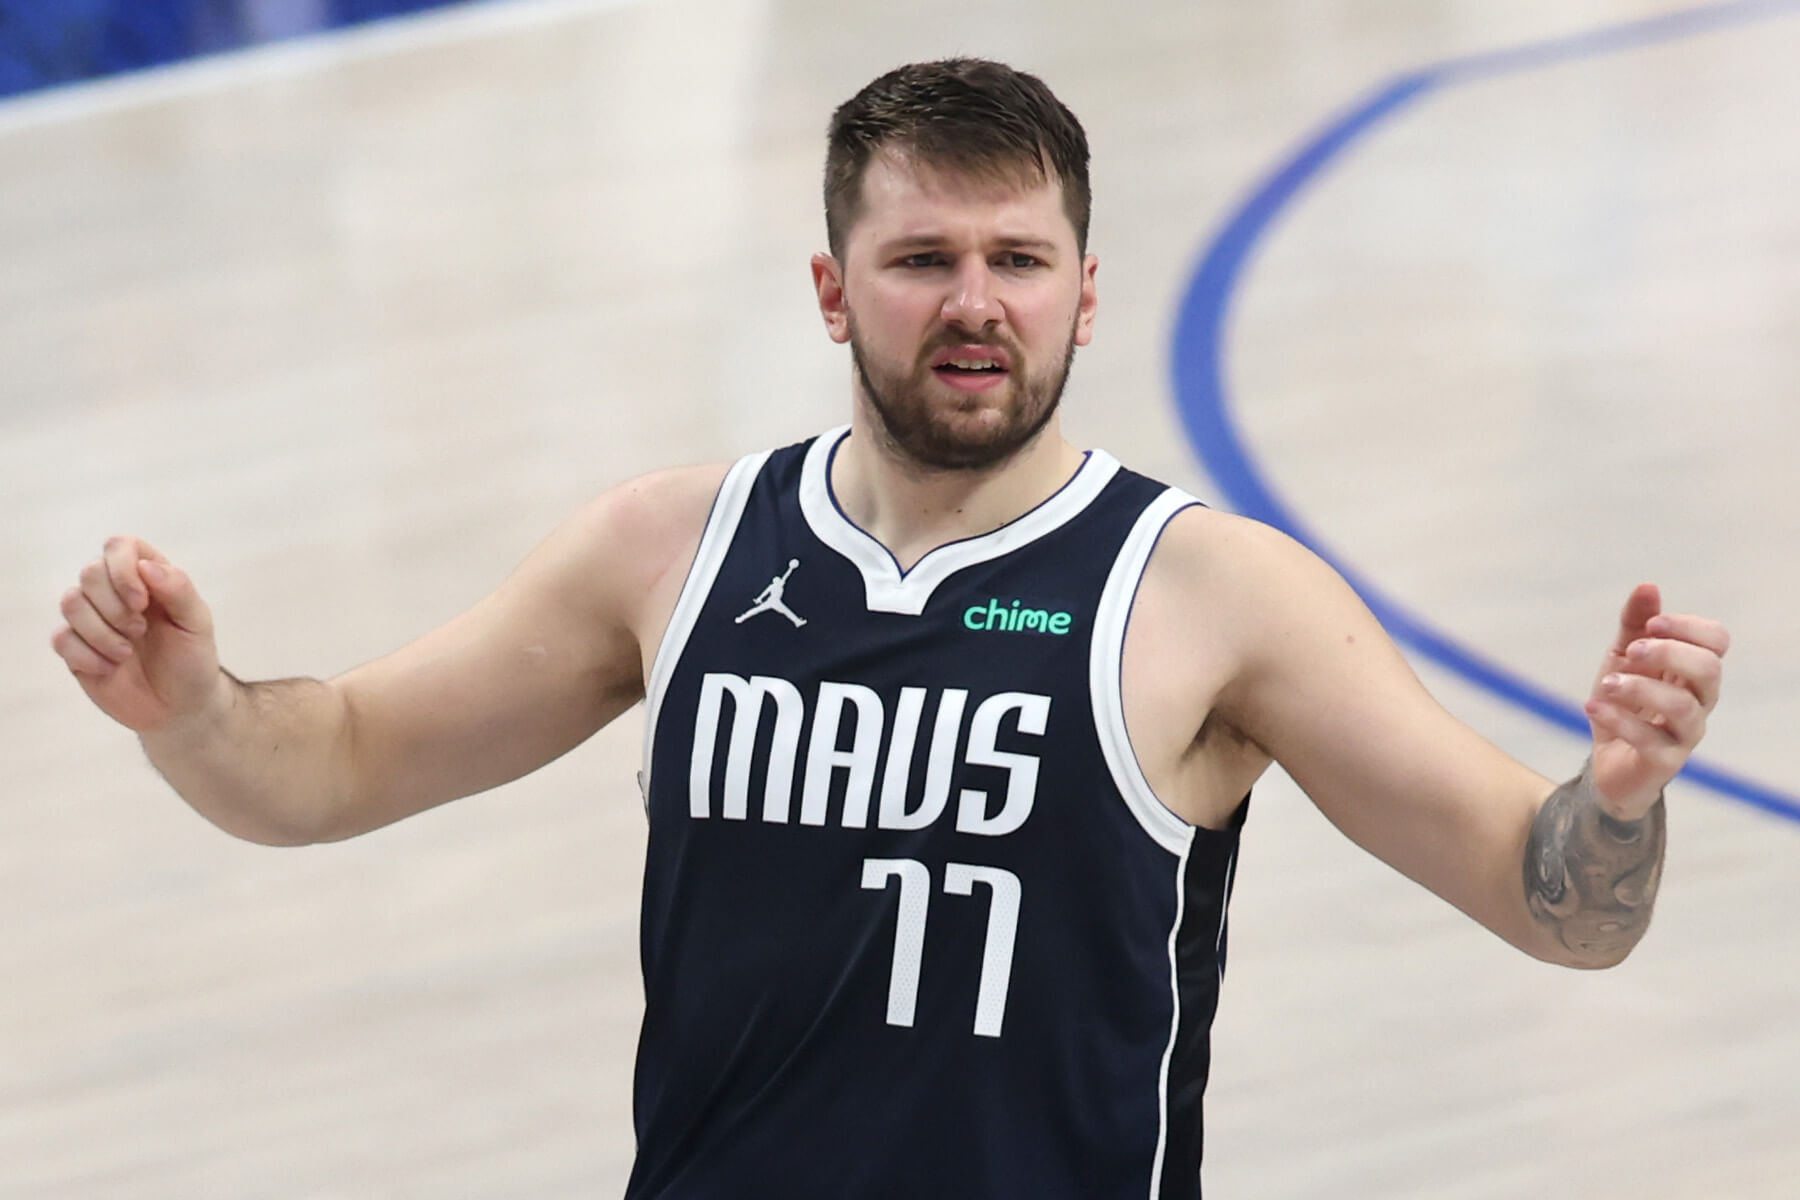 Luka Doncic #77 of the Dallas Mavericks reacts during the second quarter against the Minnesota Timberwolves in Game Four of the Western Conference Finals at American Airlines Center May 28 in Dallas, Texas.